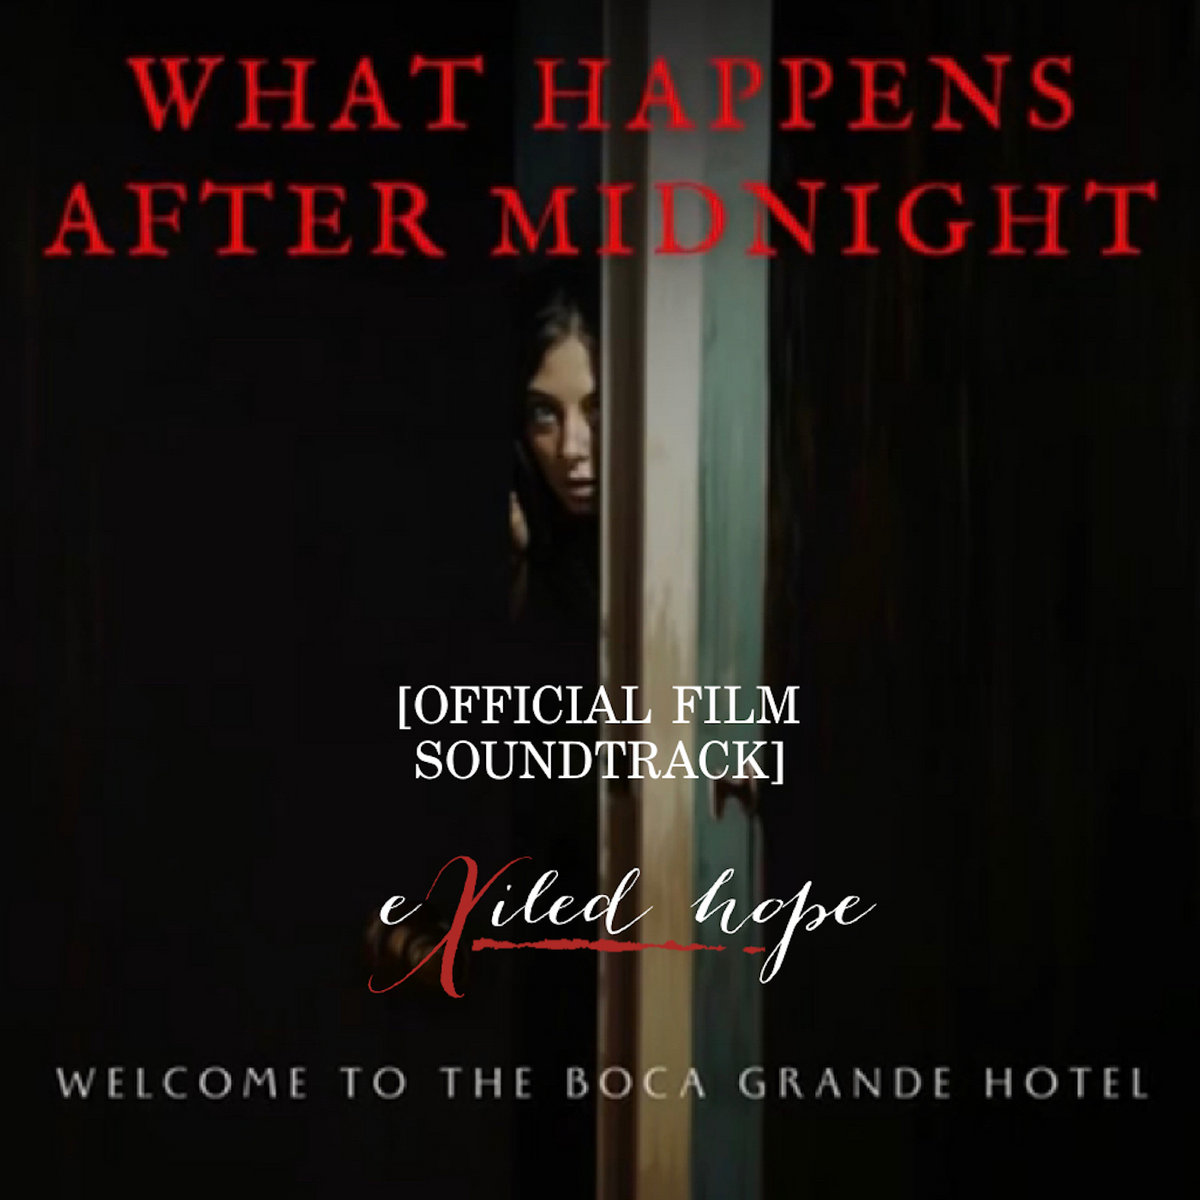 SOUNDTRACK REVIEW: What Happens After Midnight by Exiled Hope